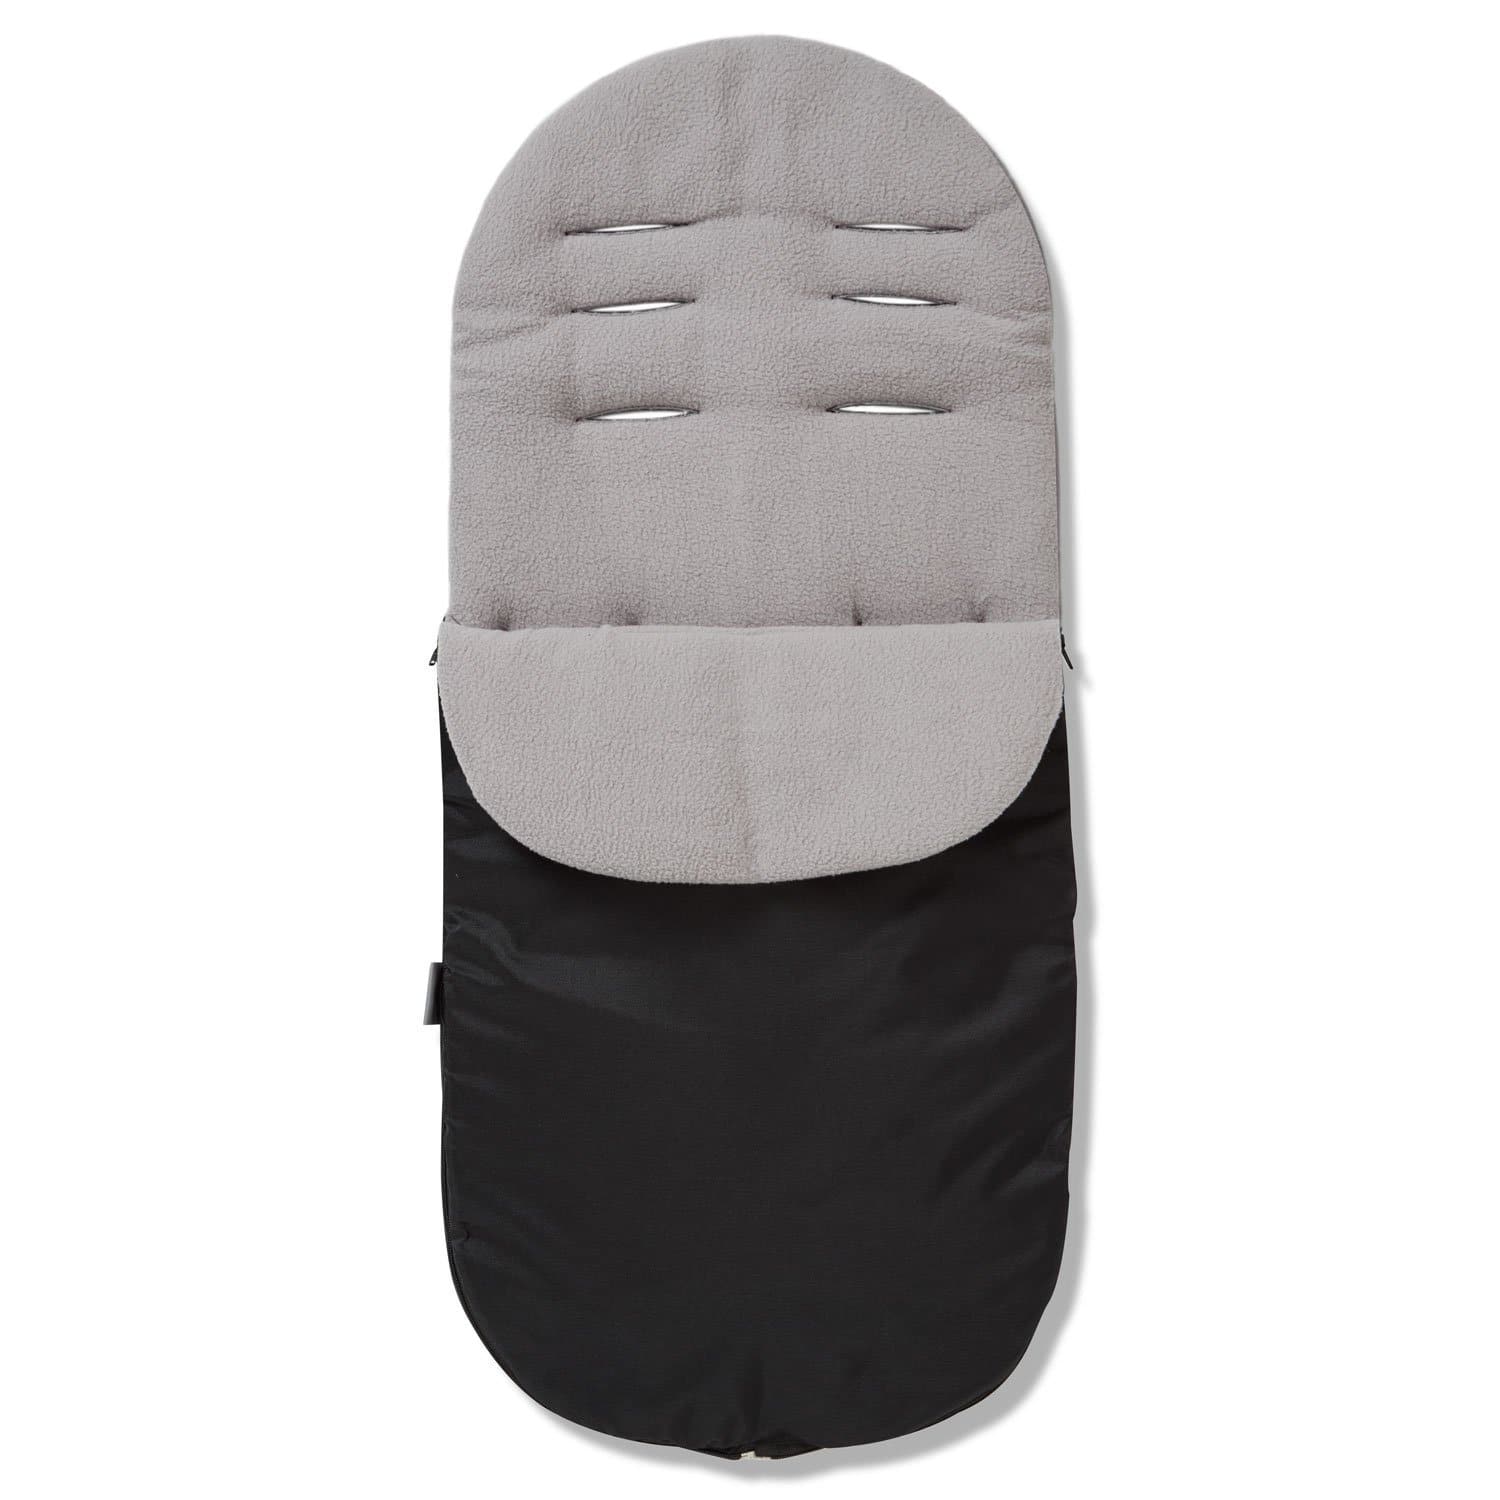 Footmuff / Cosy Toes Compatible with Nania - Grey / Fits All Models | For Your Little One